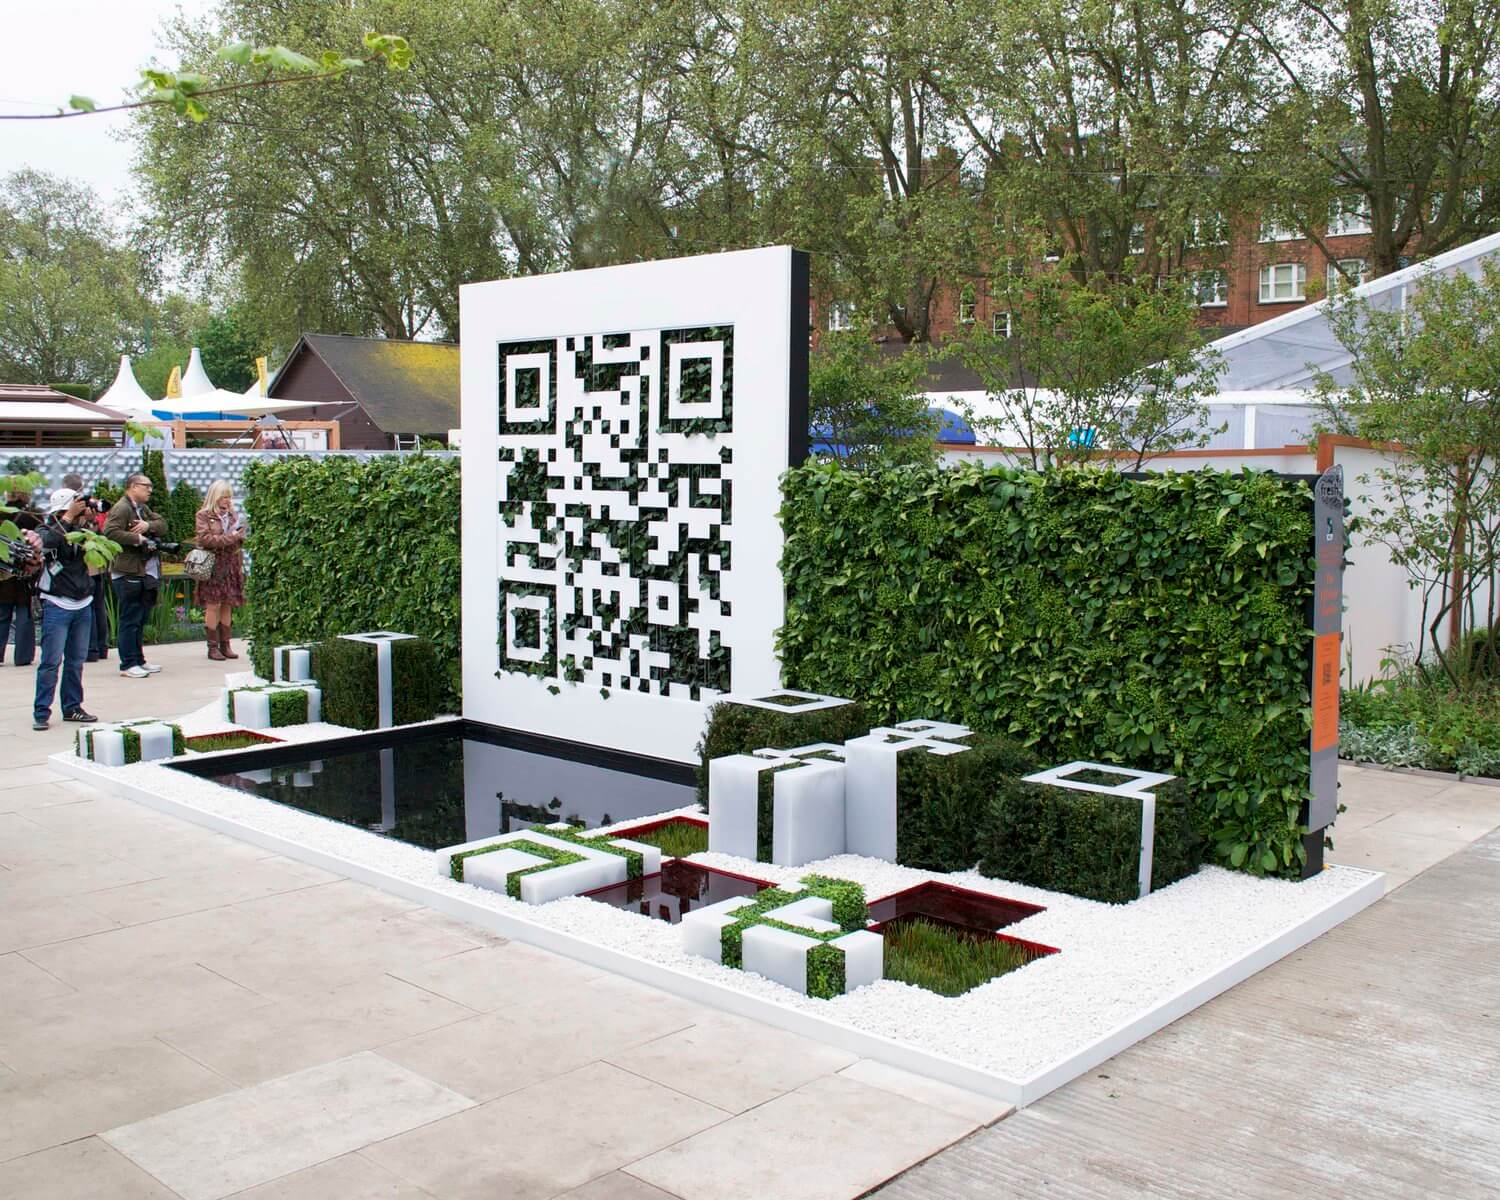 A large outdoor QR code made from Re-Board in front of a leafy green garden display.